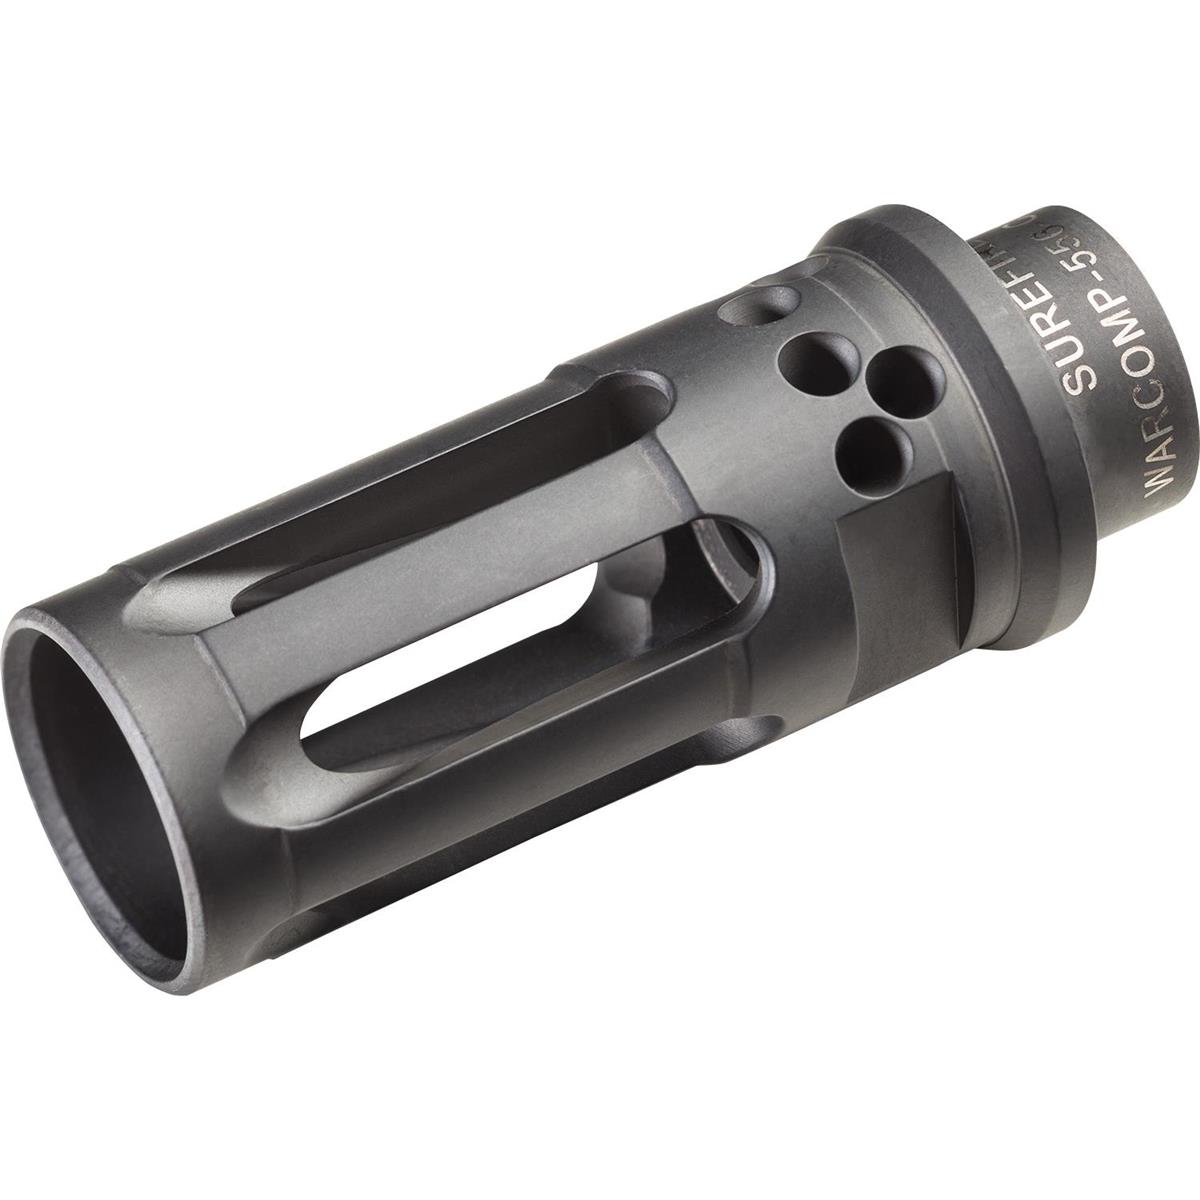 Image of SureFire Ported WARCOMP Closed Tine Muzzle Brake for M4/M16/AR Variants